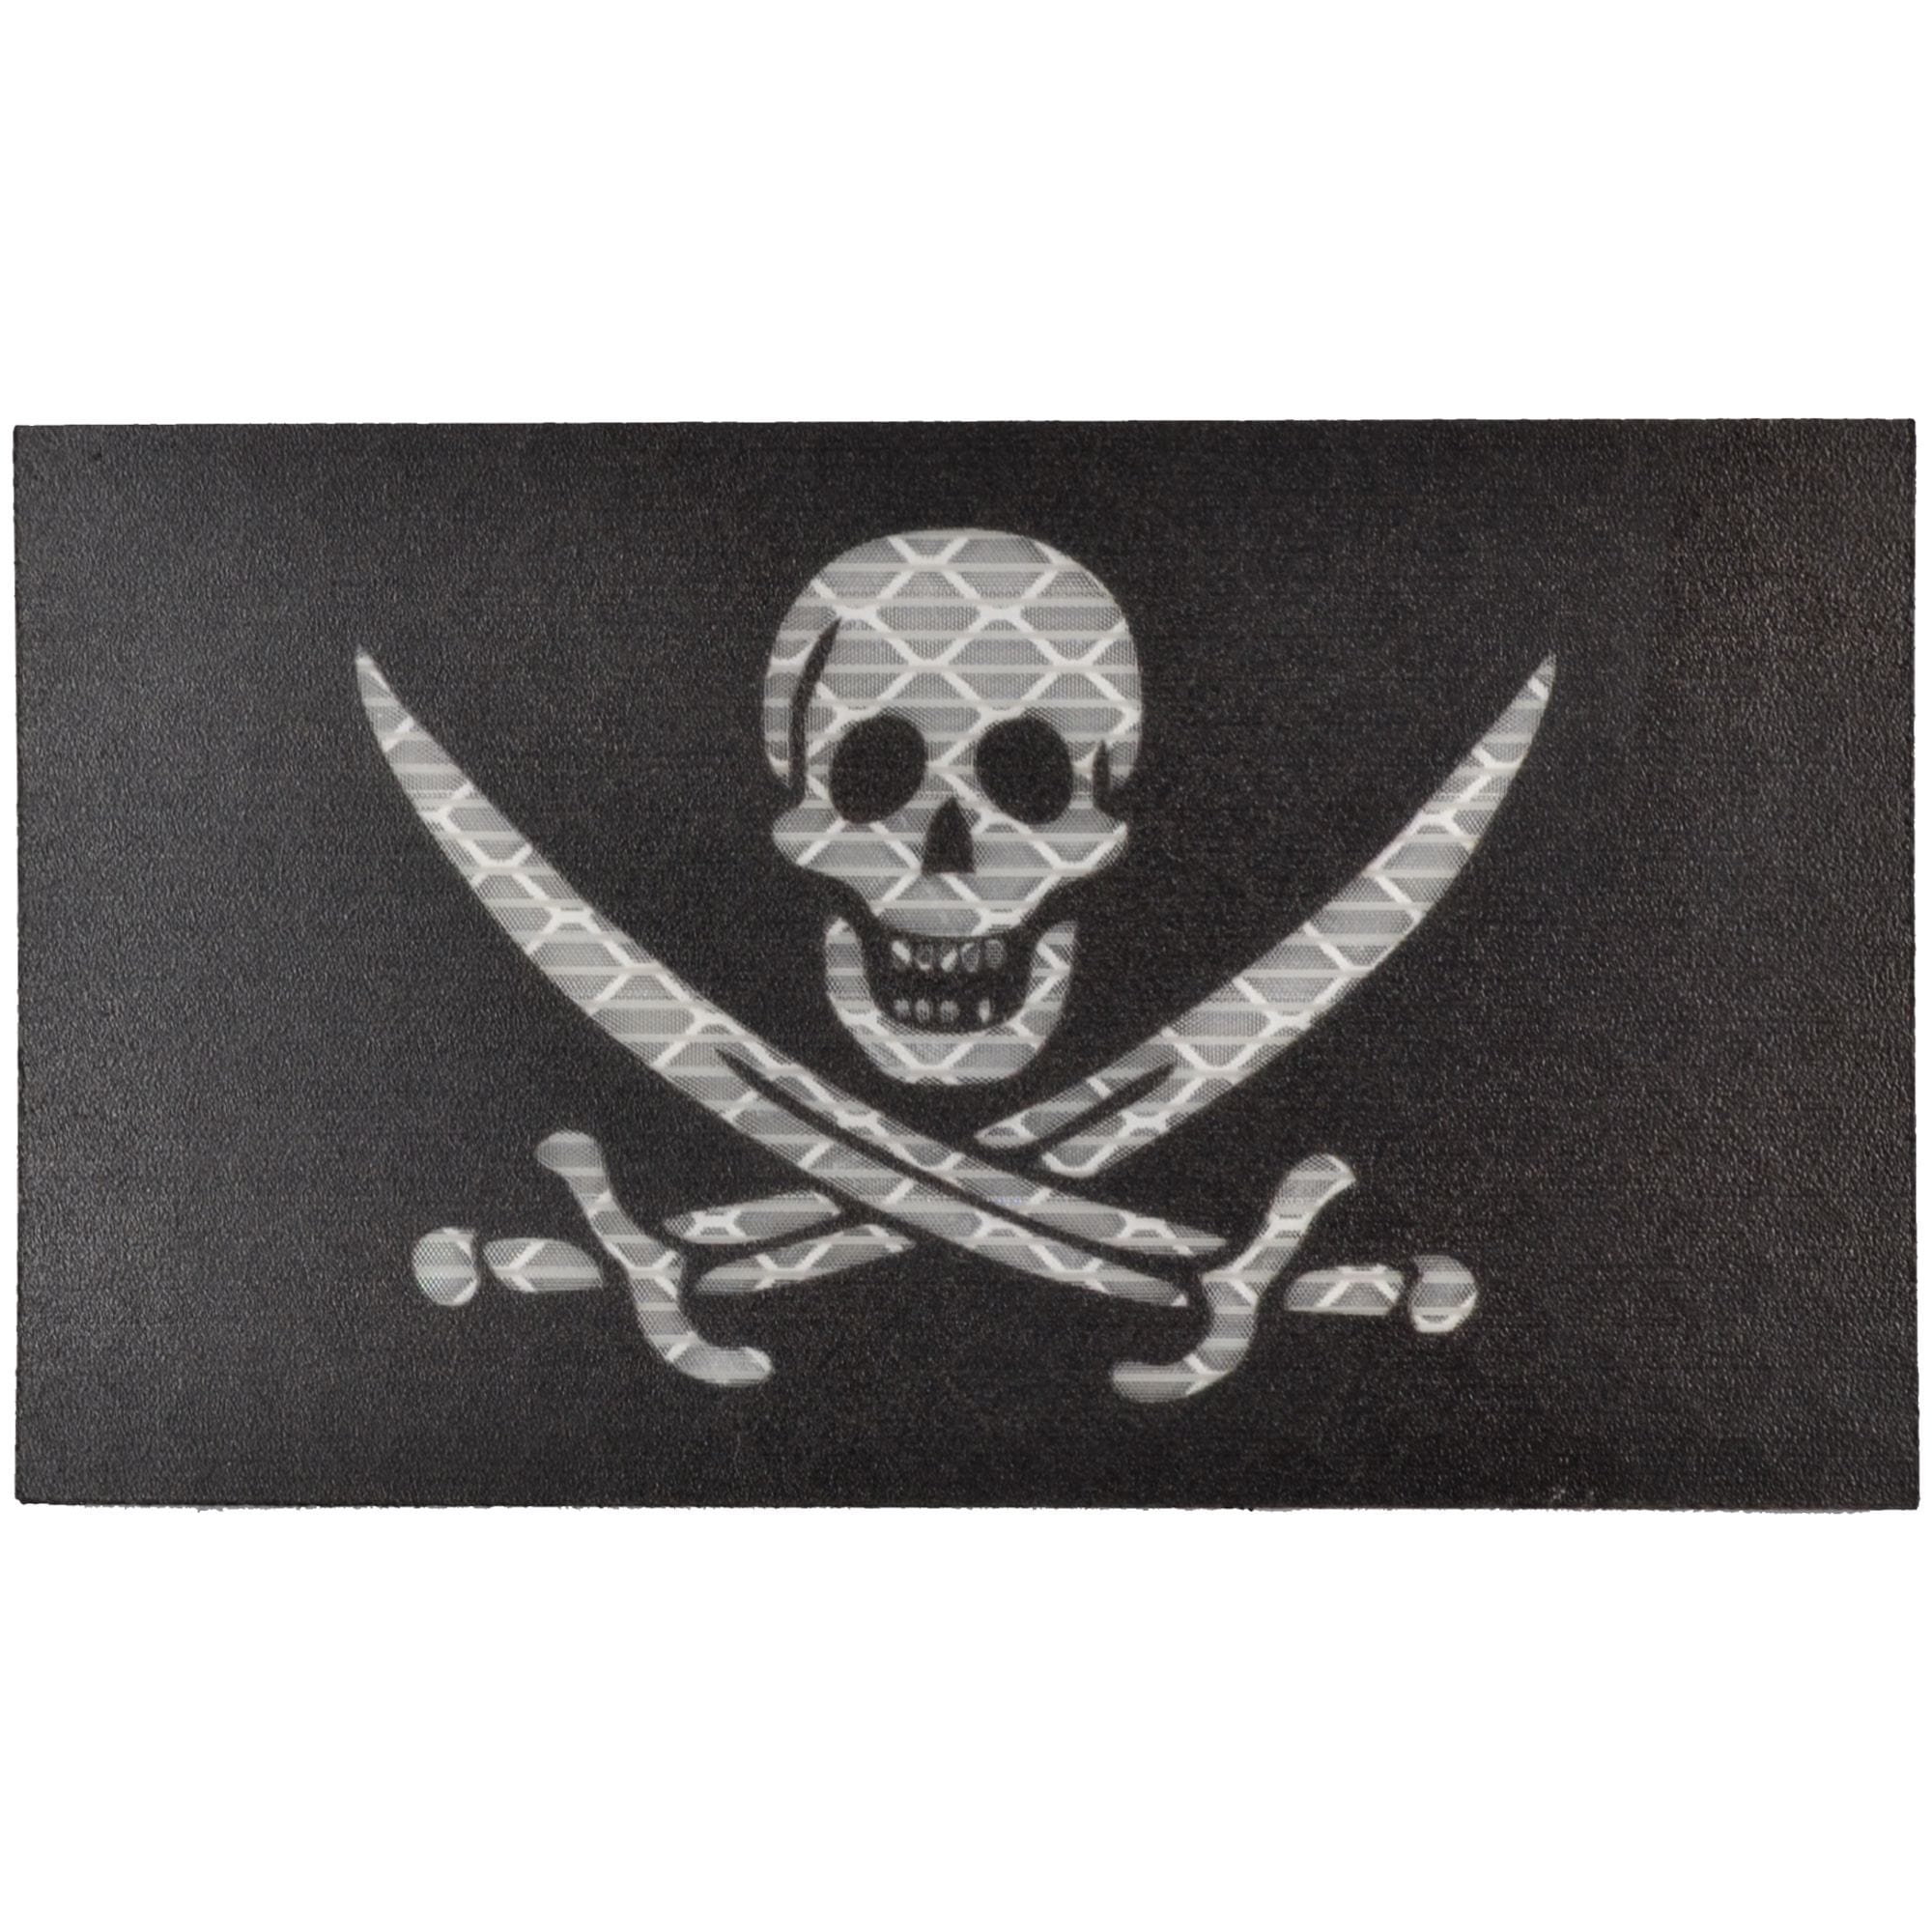 Tactical Gear Junkie Patches Reflective Jolly Roger Pirate Flag - 2x3.5 Patch